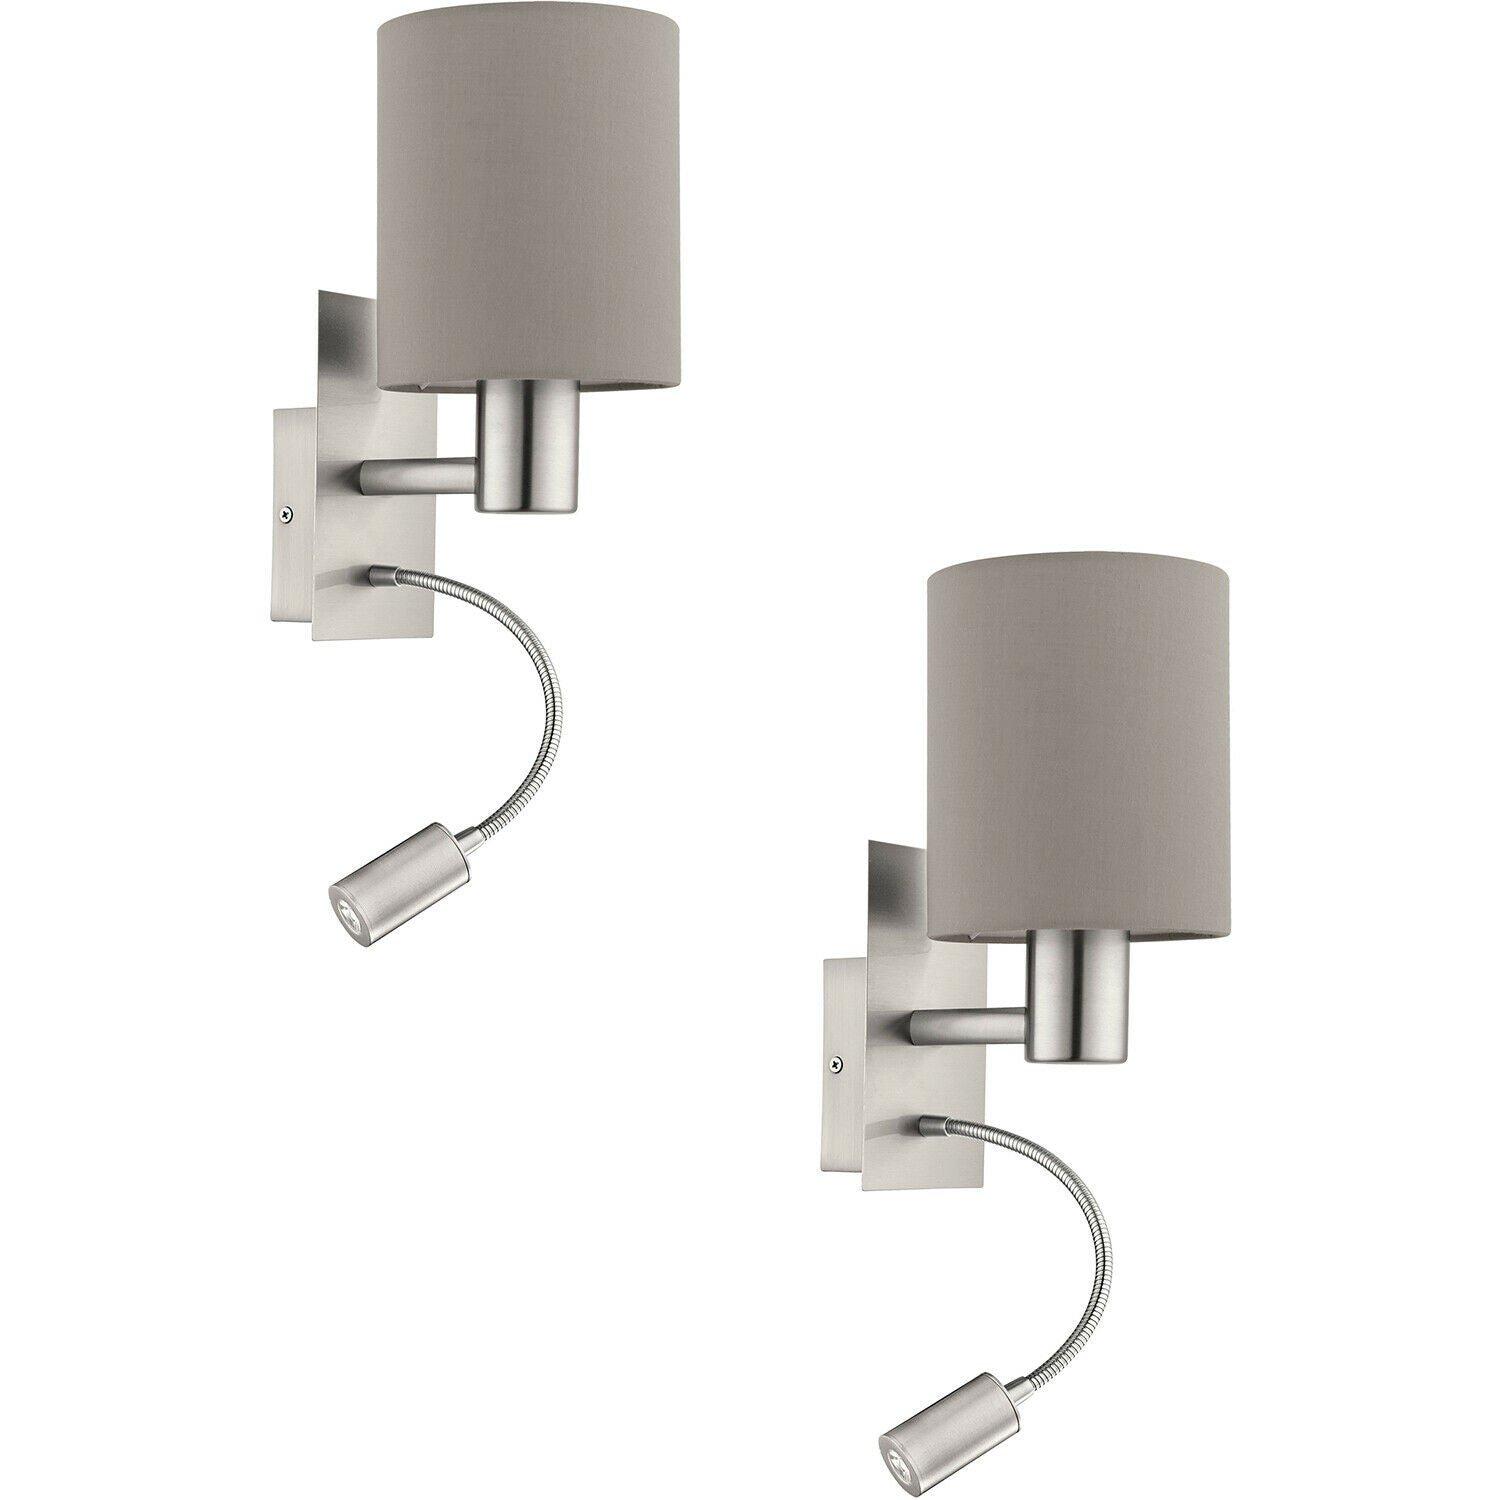 2 PACK Wall Light Colour Satin Nickel Shade Taupe Fabric E27 LED 1x40W 1x3.5W